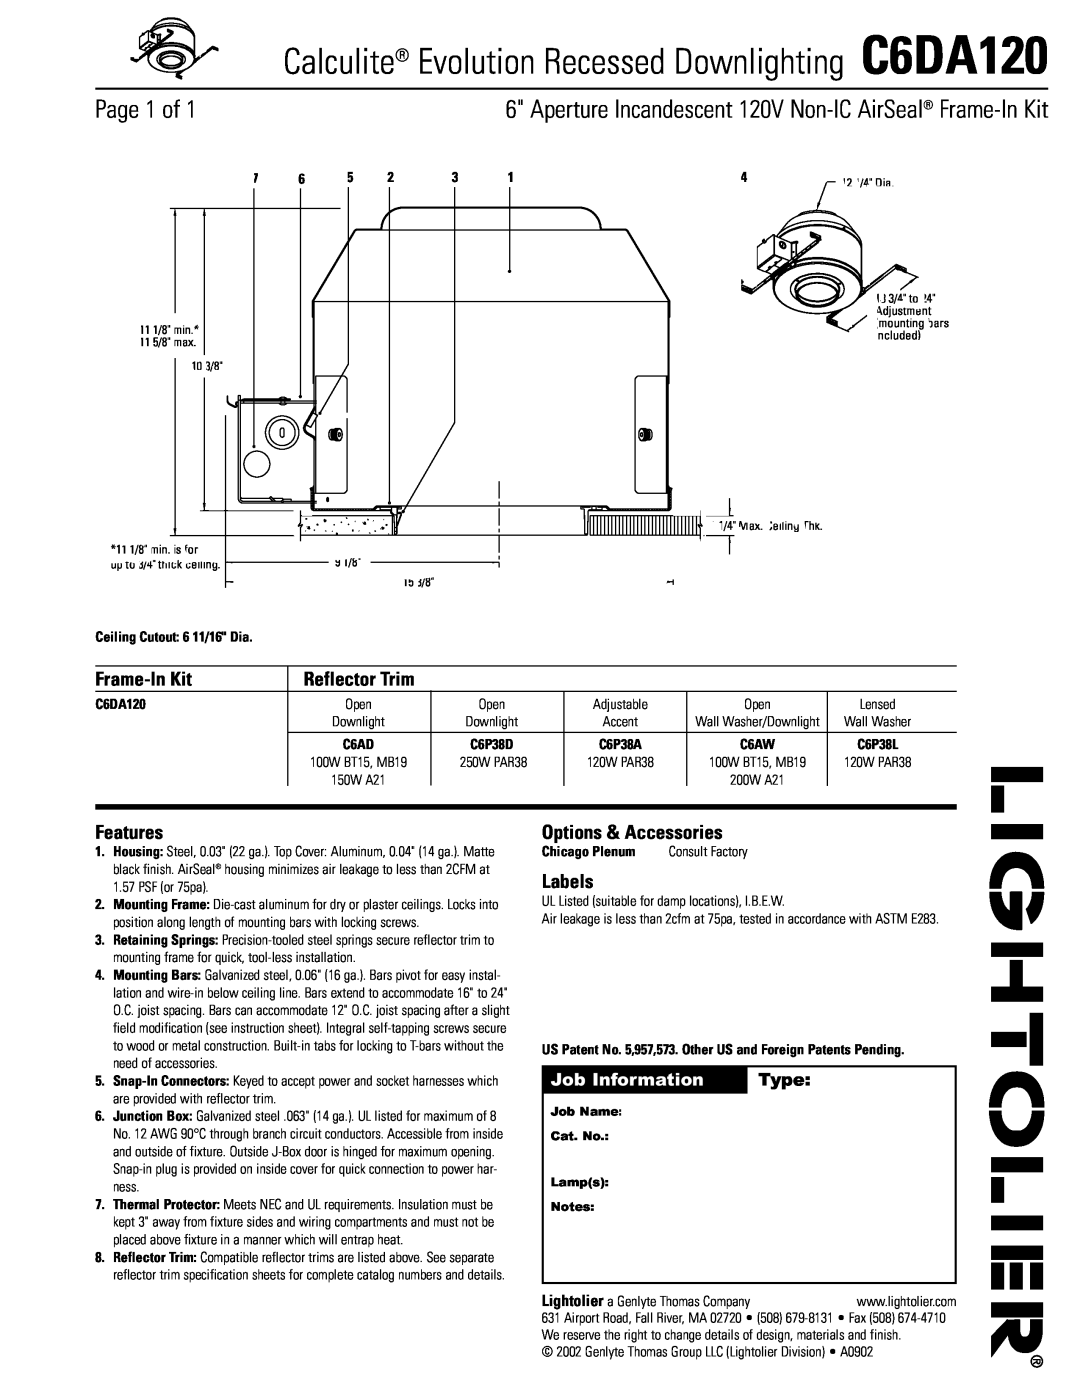 Lightolier instruction sheet Calculite Evolution Recessed Downlighting C6DA120, Page 1 of, Frame-InKit, Features, Type 